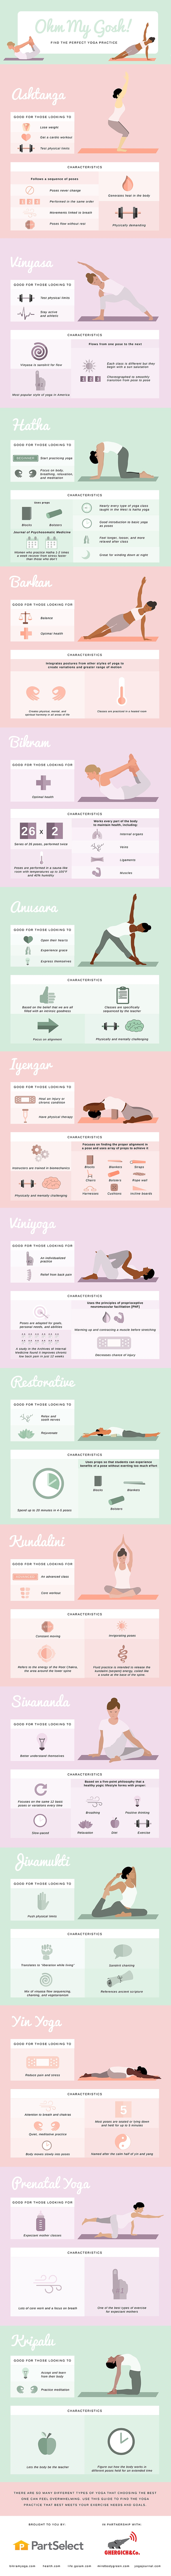 Find The Best Yoga Practice For Your Needs Infographic